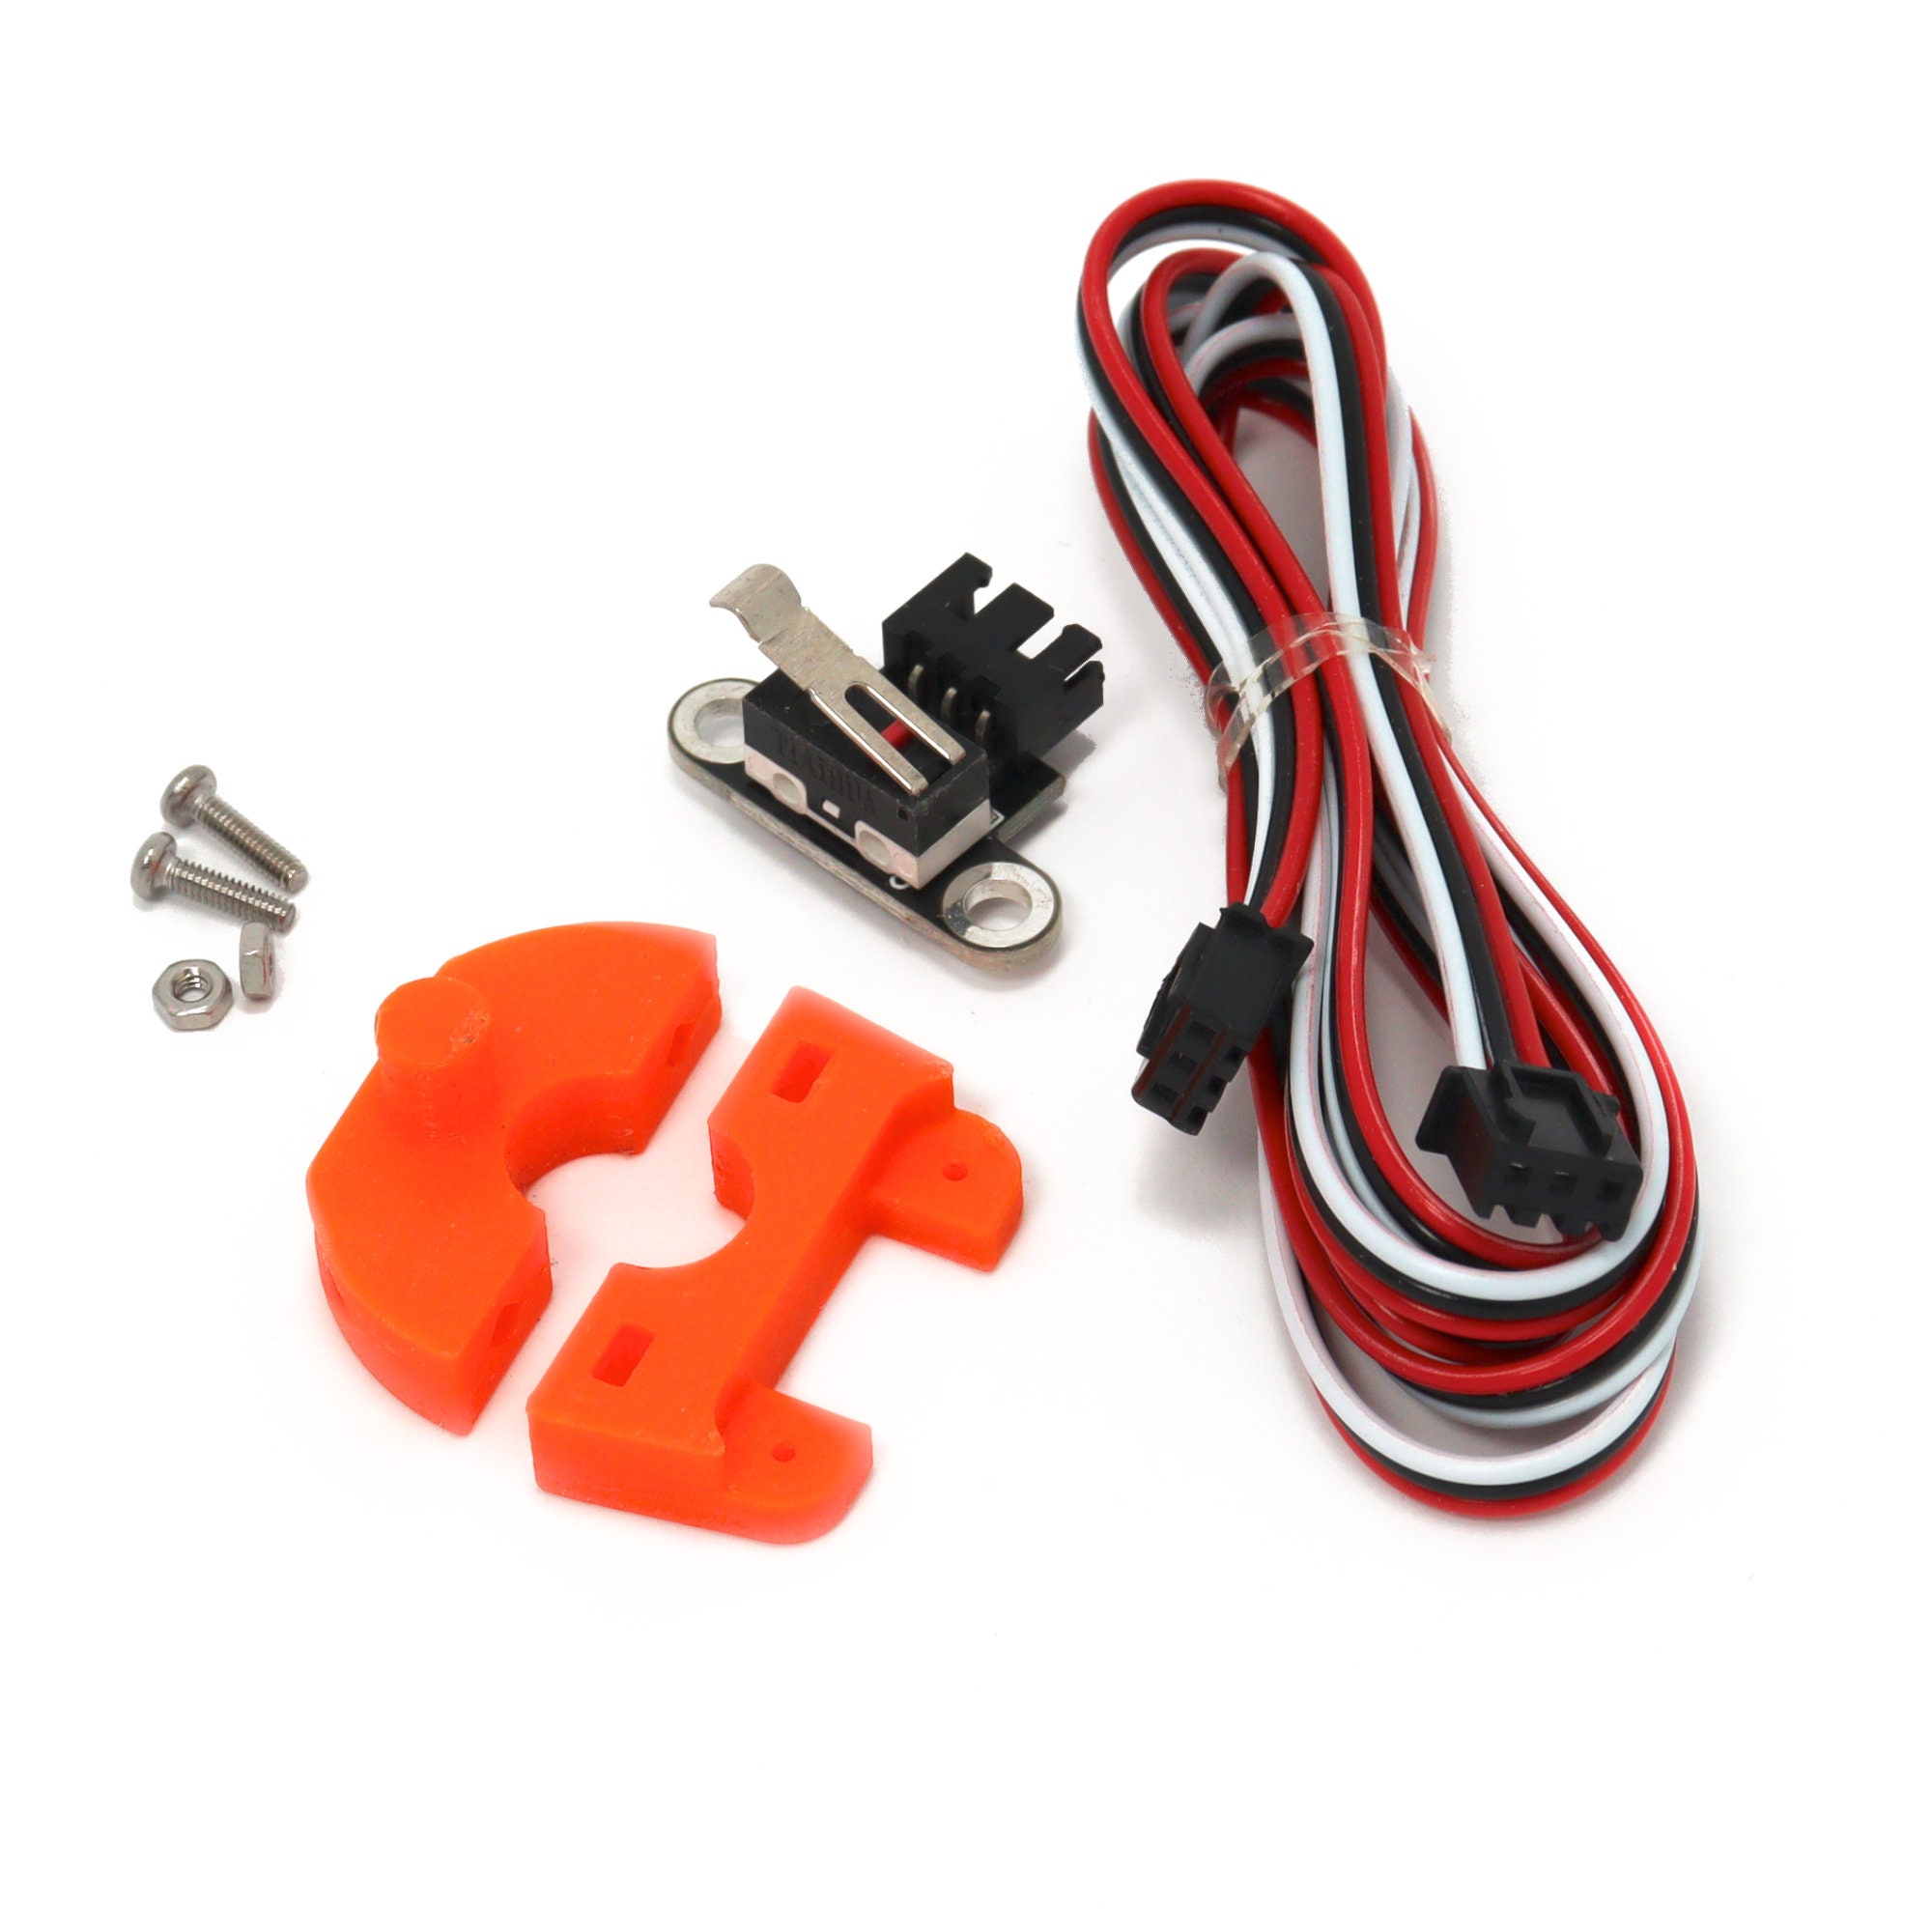 3018 CNC Micro Limit and Homing Switch With Sliding Etsy 日本